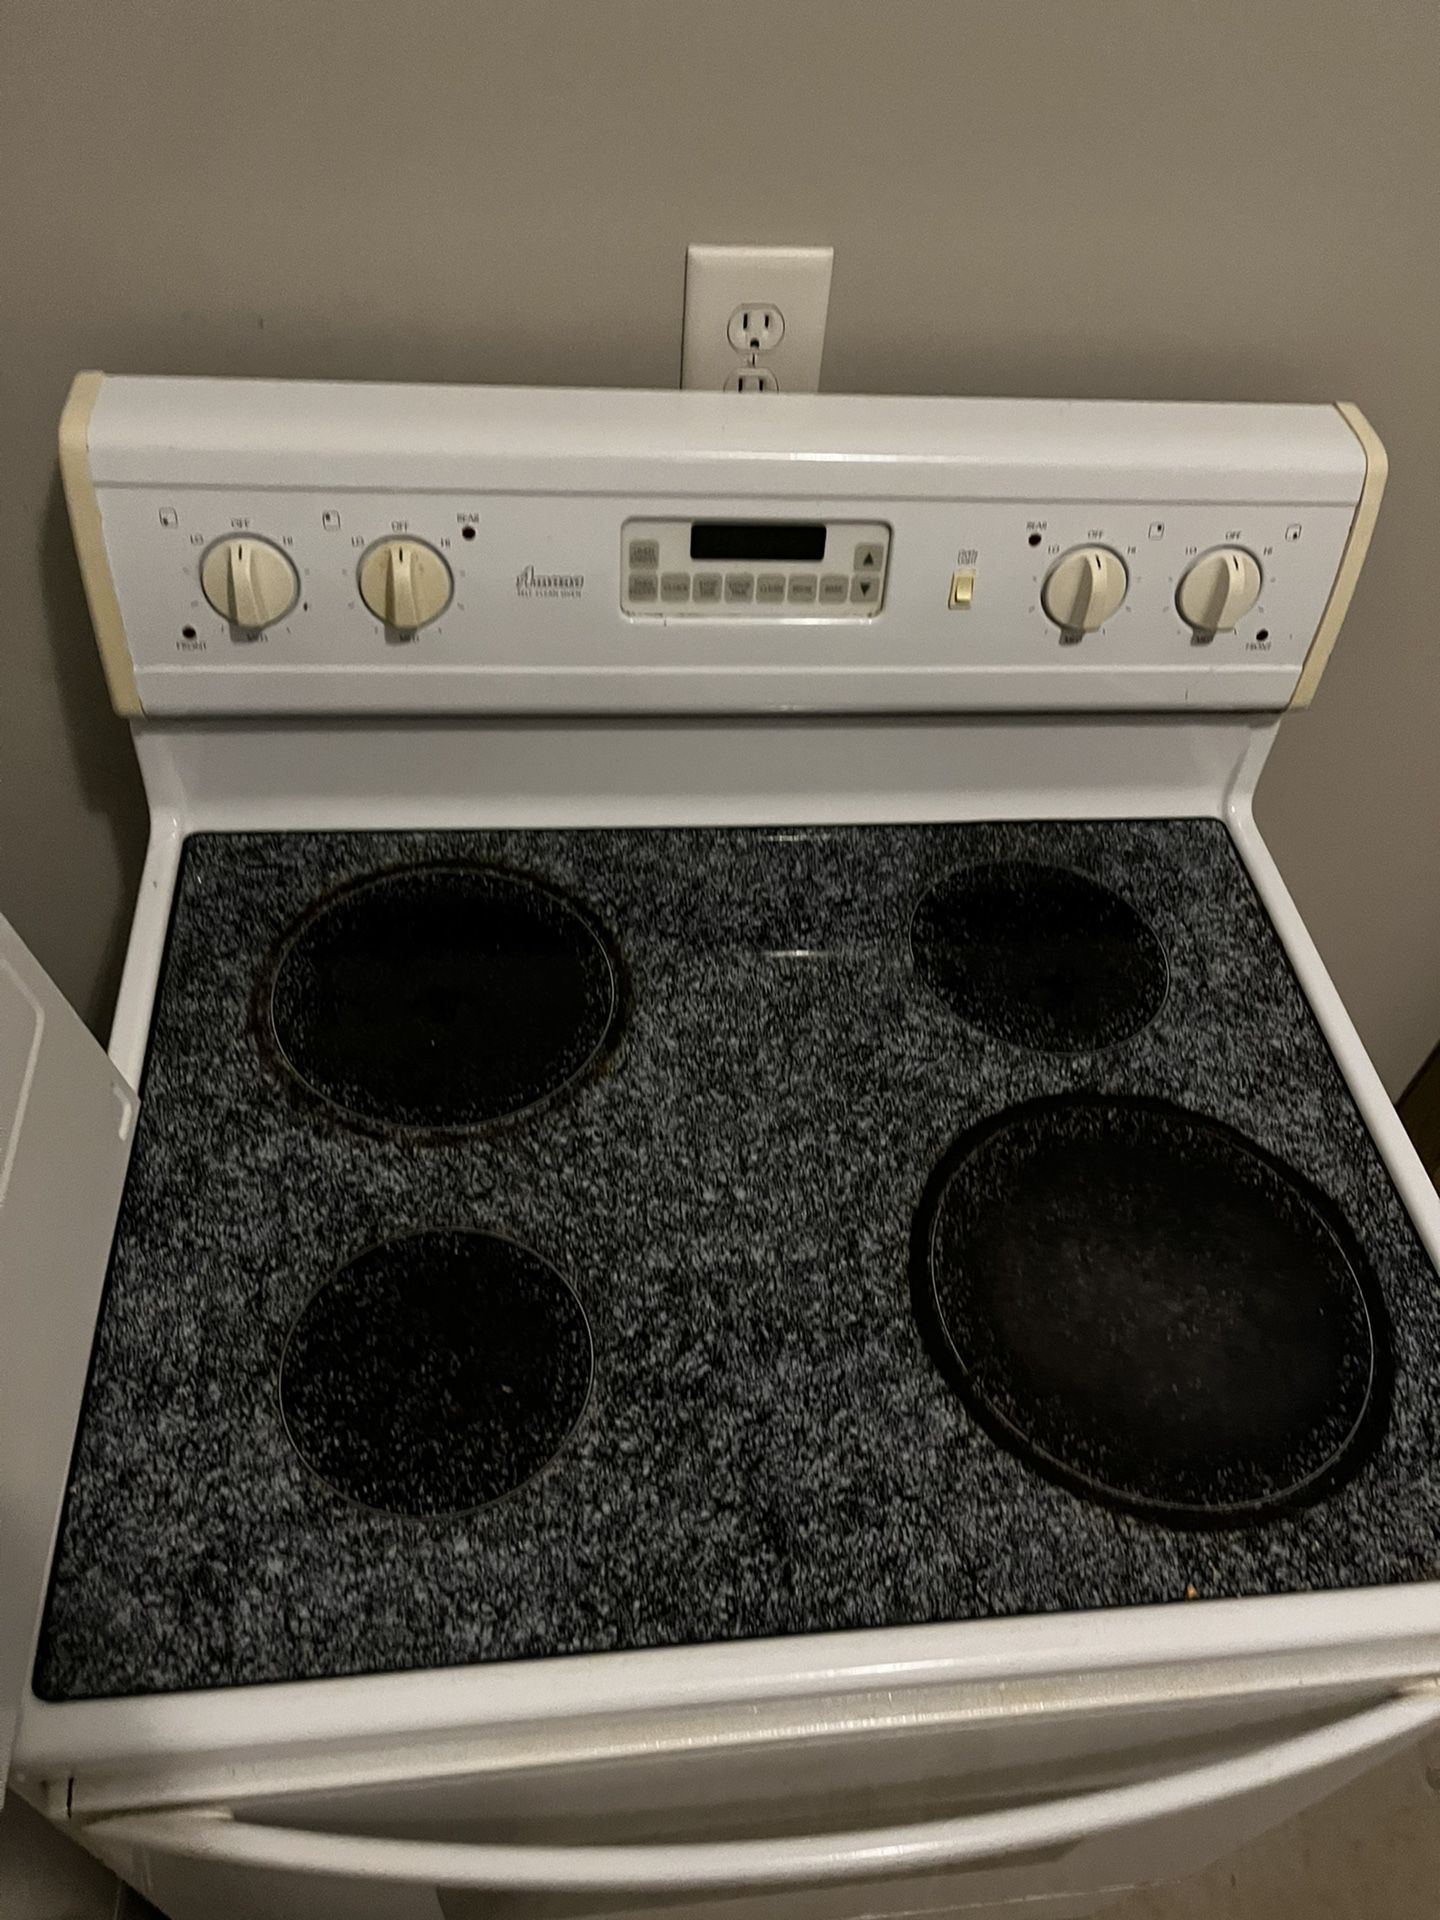 Stove Microwave Dishwasher Combo Sold As Is